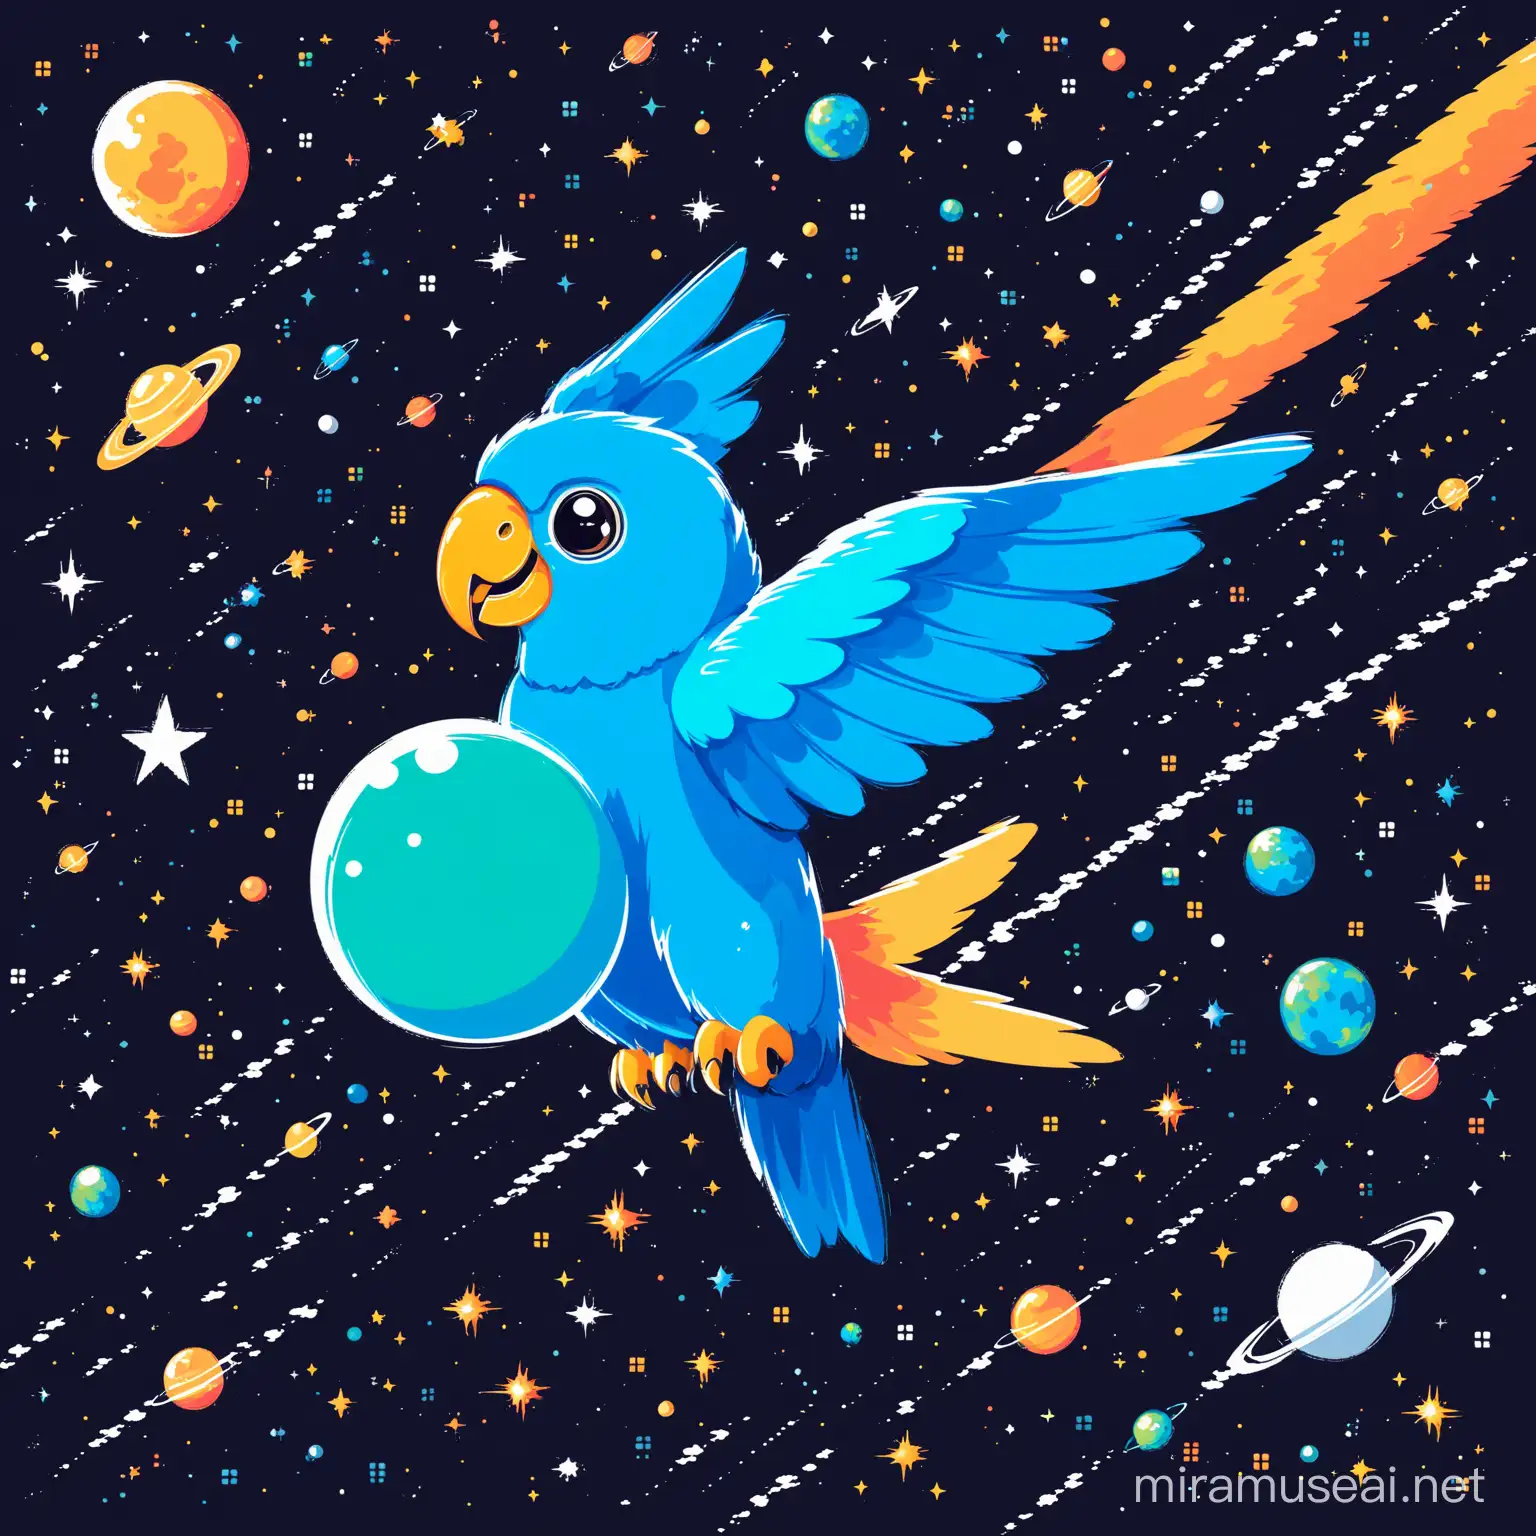 Blue Parrot Flying in Space Vector Illustration